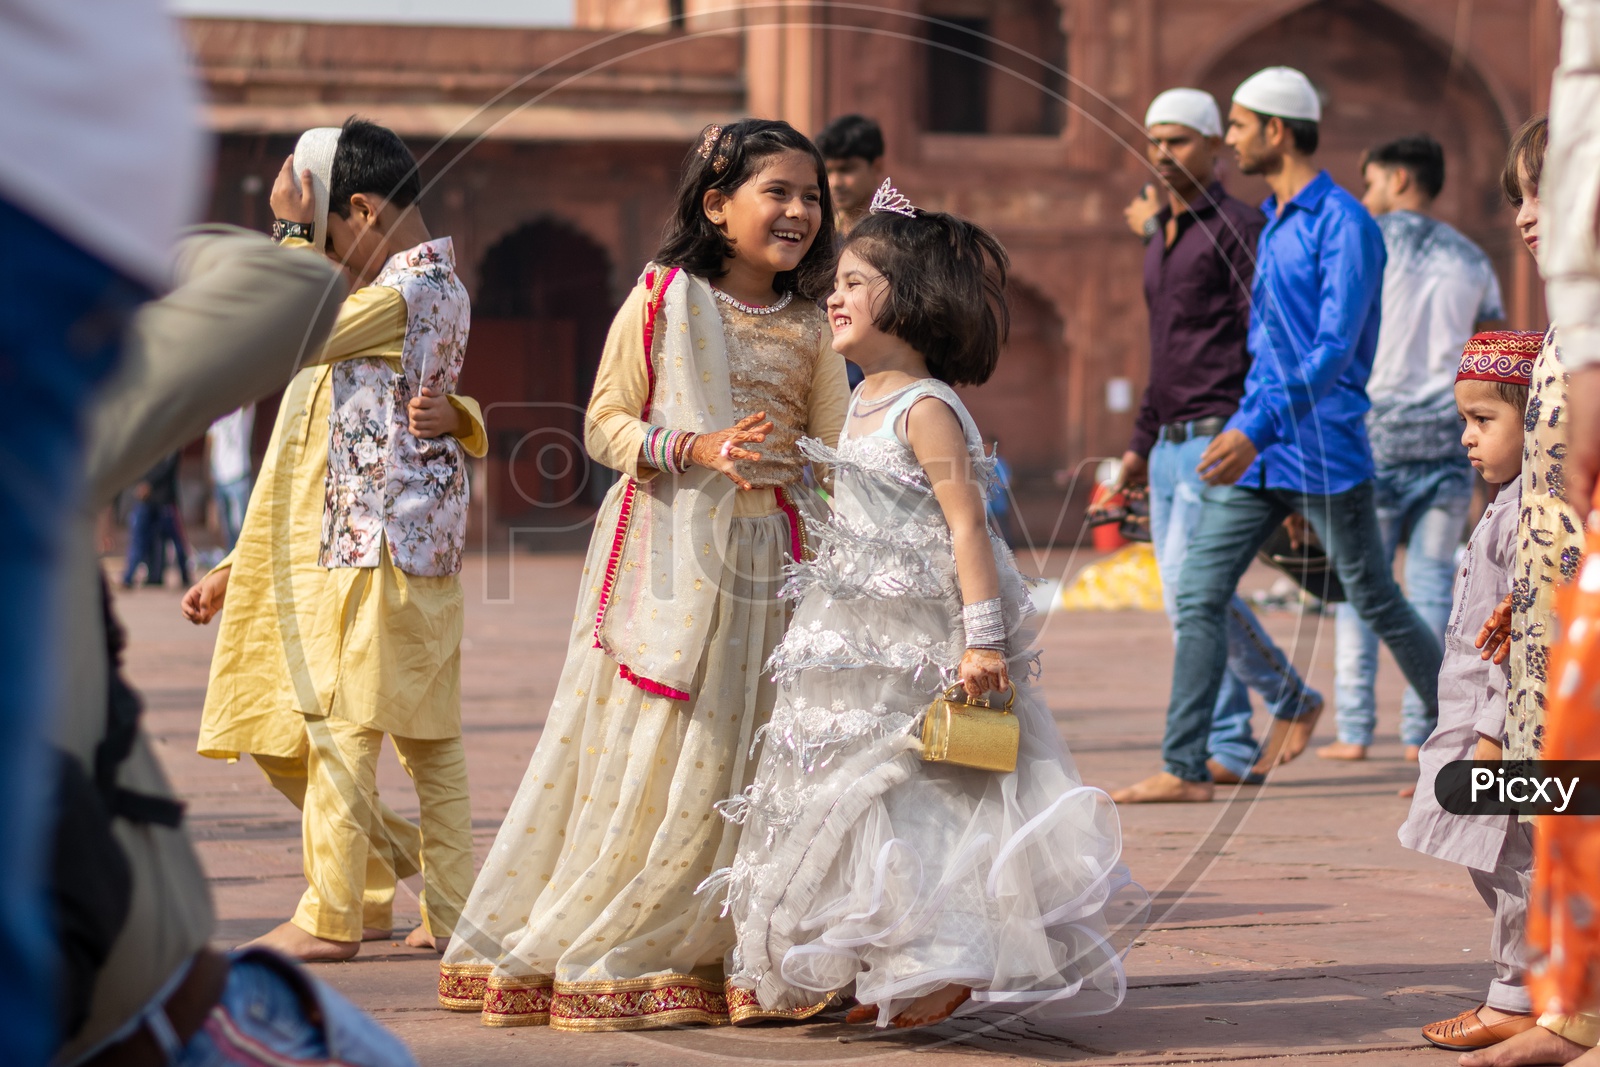 Children playing on the day of Eid-ul-Fitr (End of the holy month of Ramadan) at Jama Masjid, Delhi